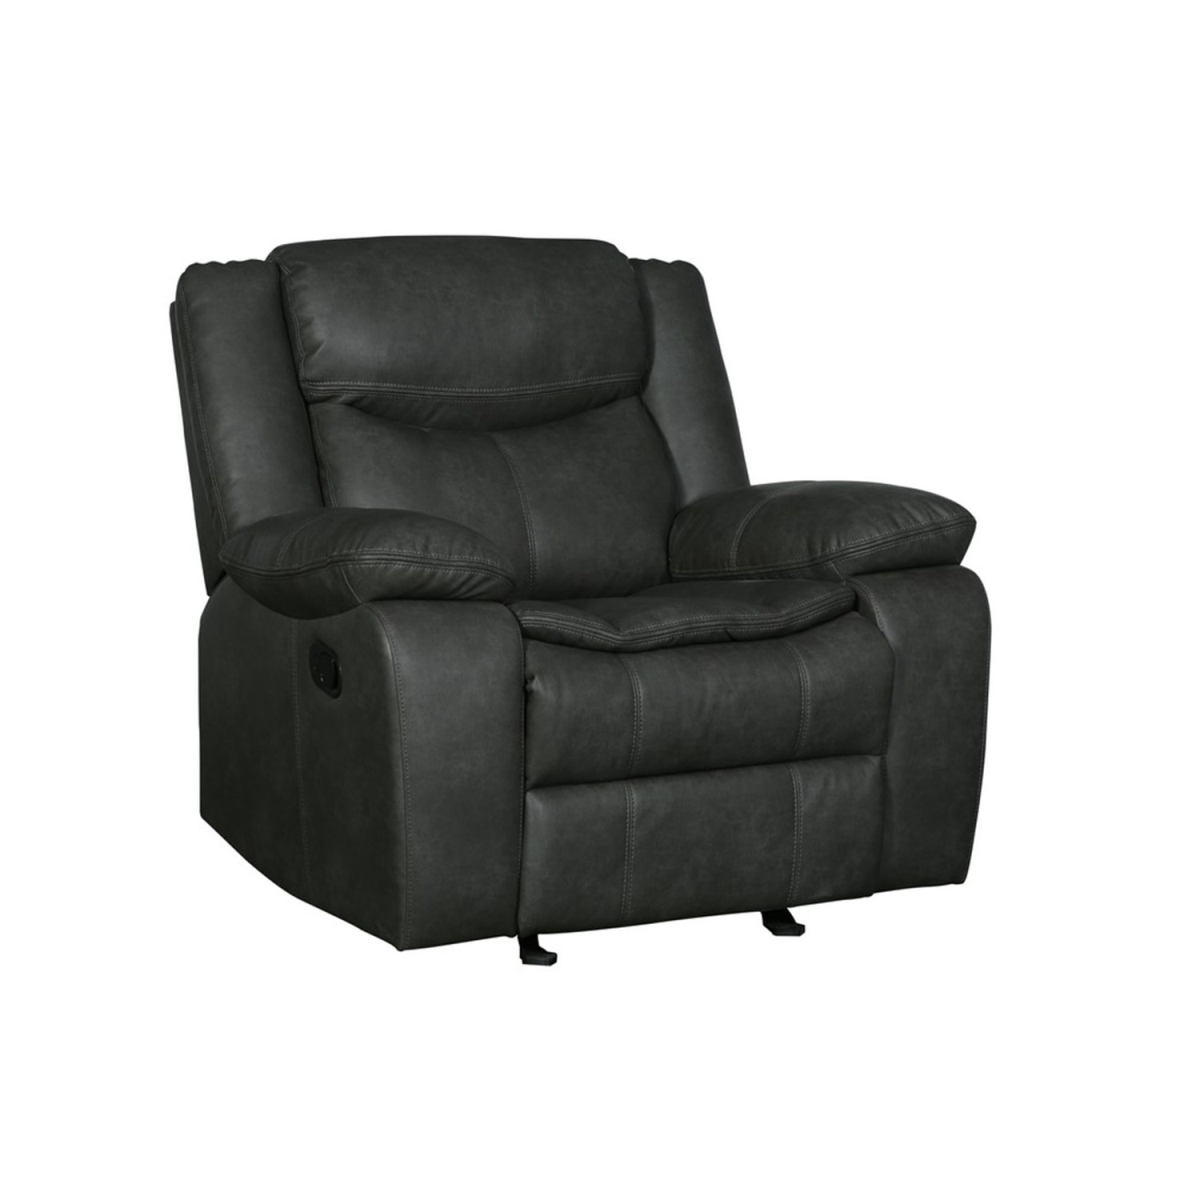 Picture of HomeRoots 366301 Leather Upholstery & Solid Wood Frame Gray Chair - 42 x 36 x 40 in.